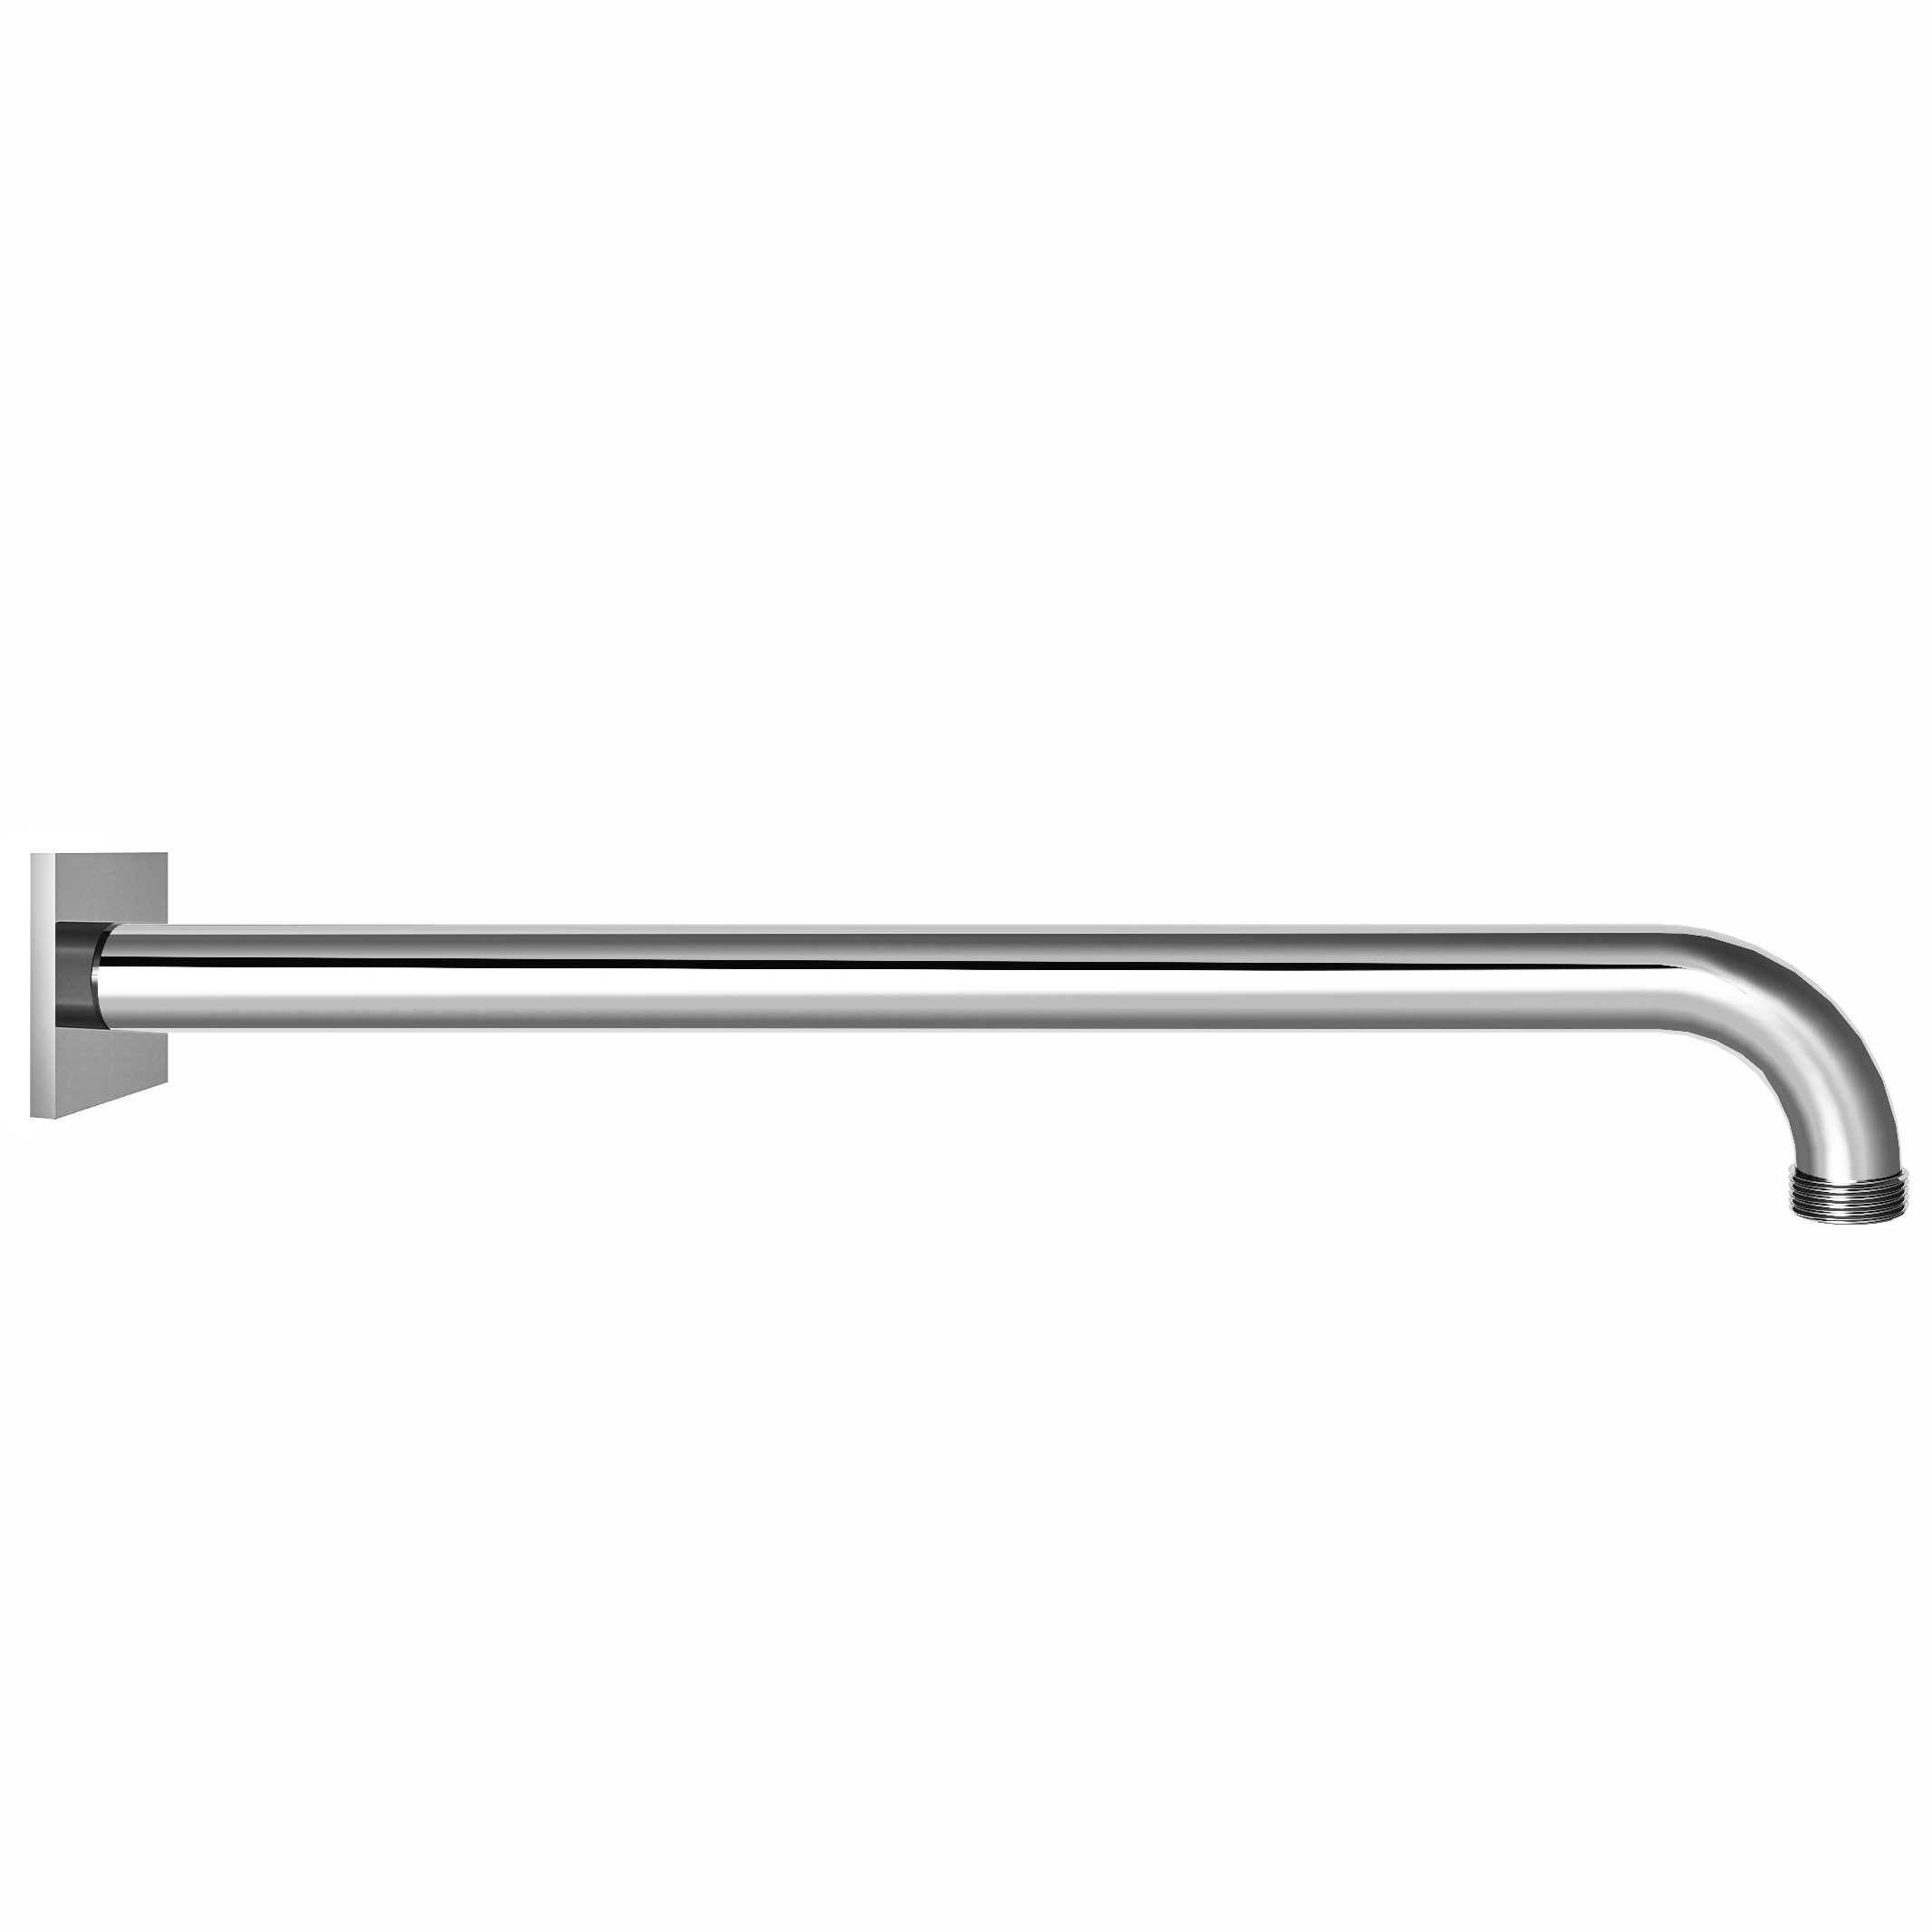 S05-2W301 Wall mounted shower arm 300mm